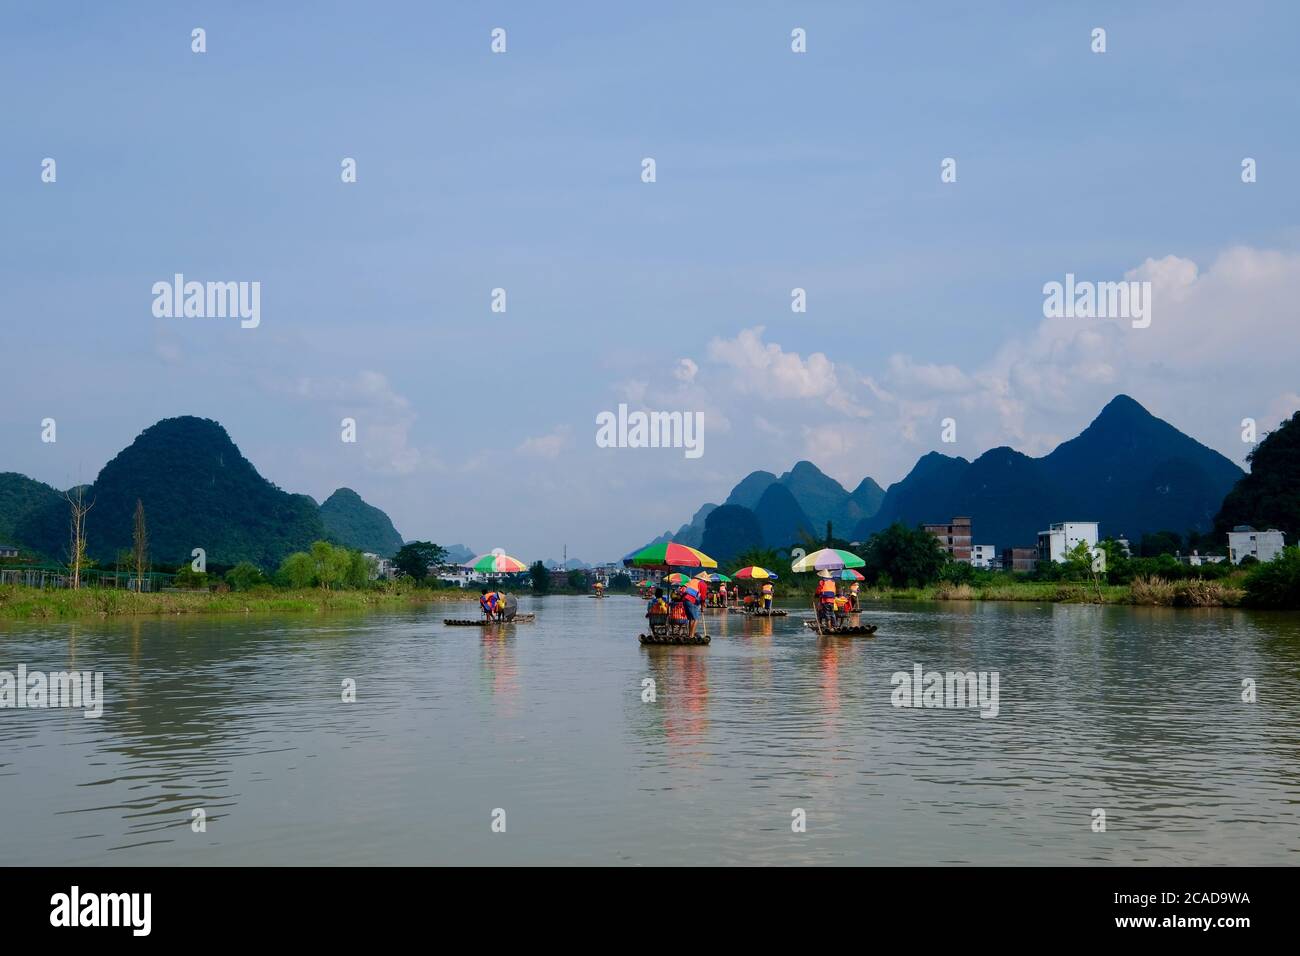 Several bamboo rafts floating on wide river. Blue mountains and blue sky with white clouds. In Yangshuo Guilin China. Karst landform Stock Photo